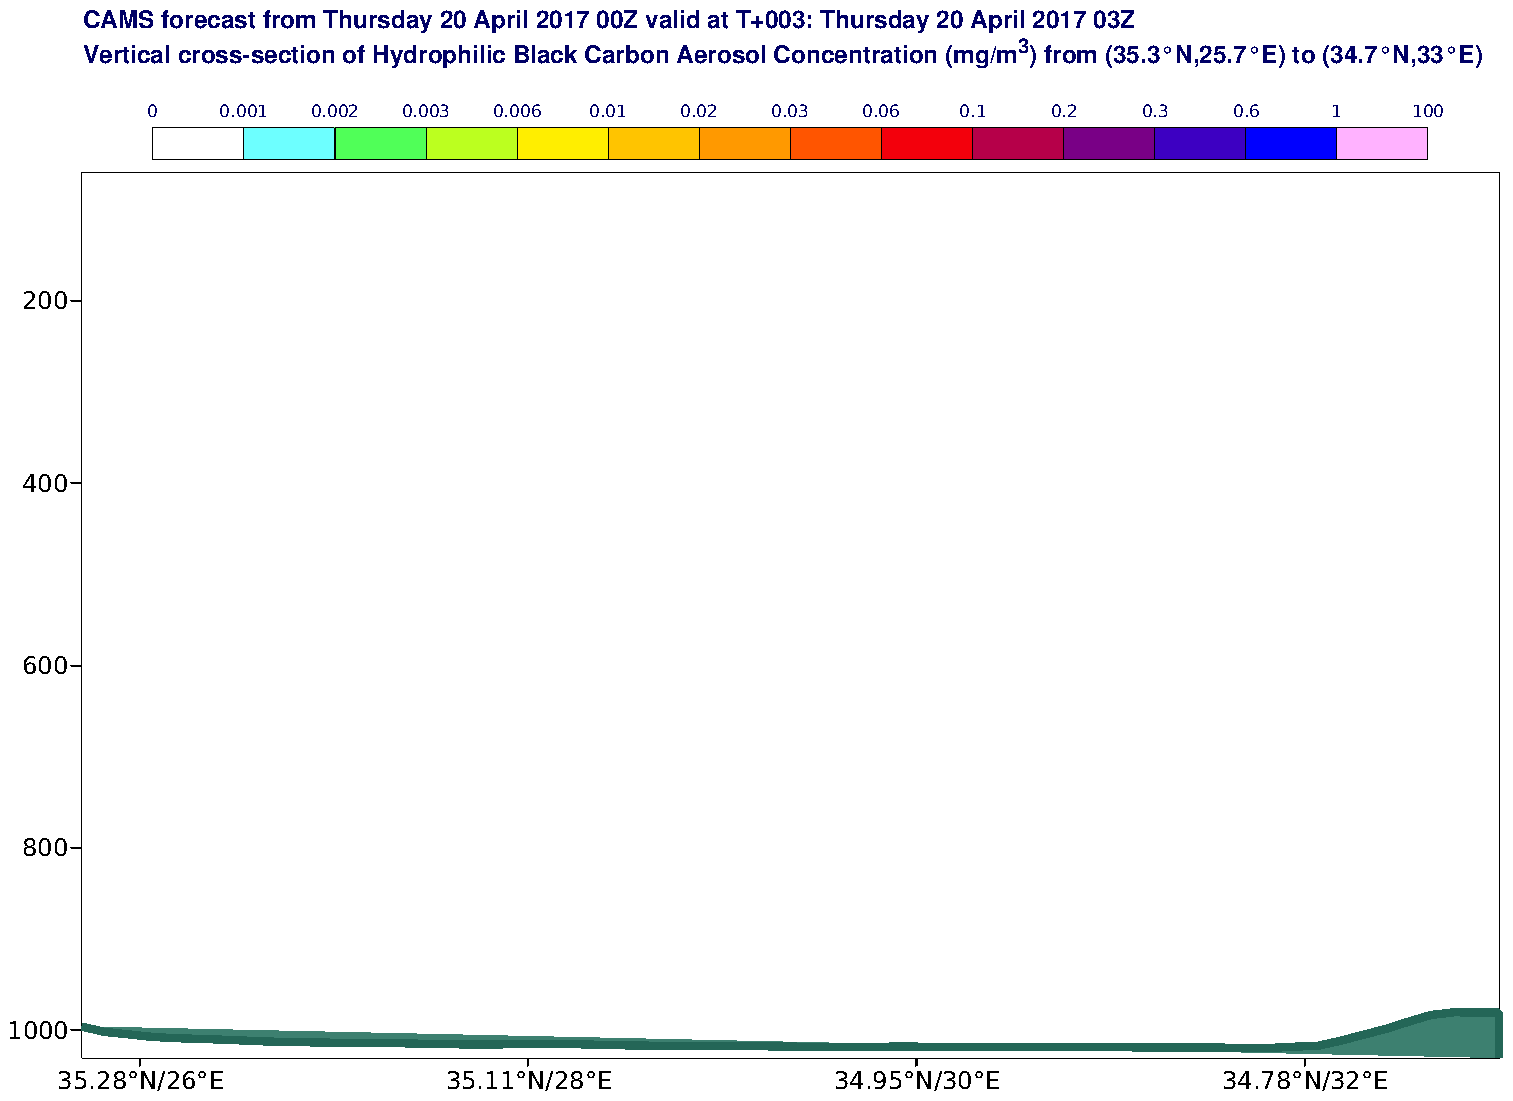 Vertical cross-section of Hydrophilic Black Carbon Aerosol Concentration (mg/m3) valid at T3 - 2017-04-20 03:00